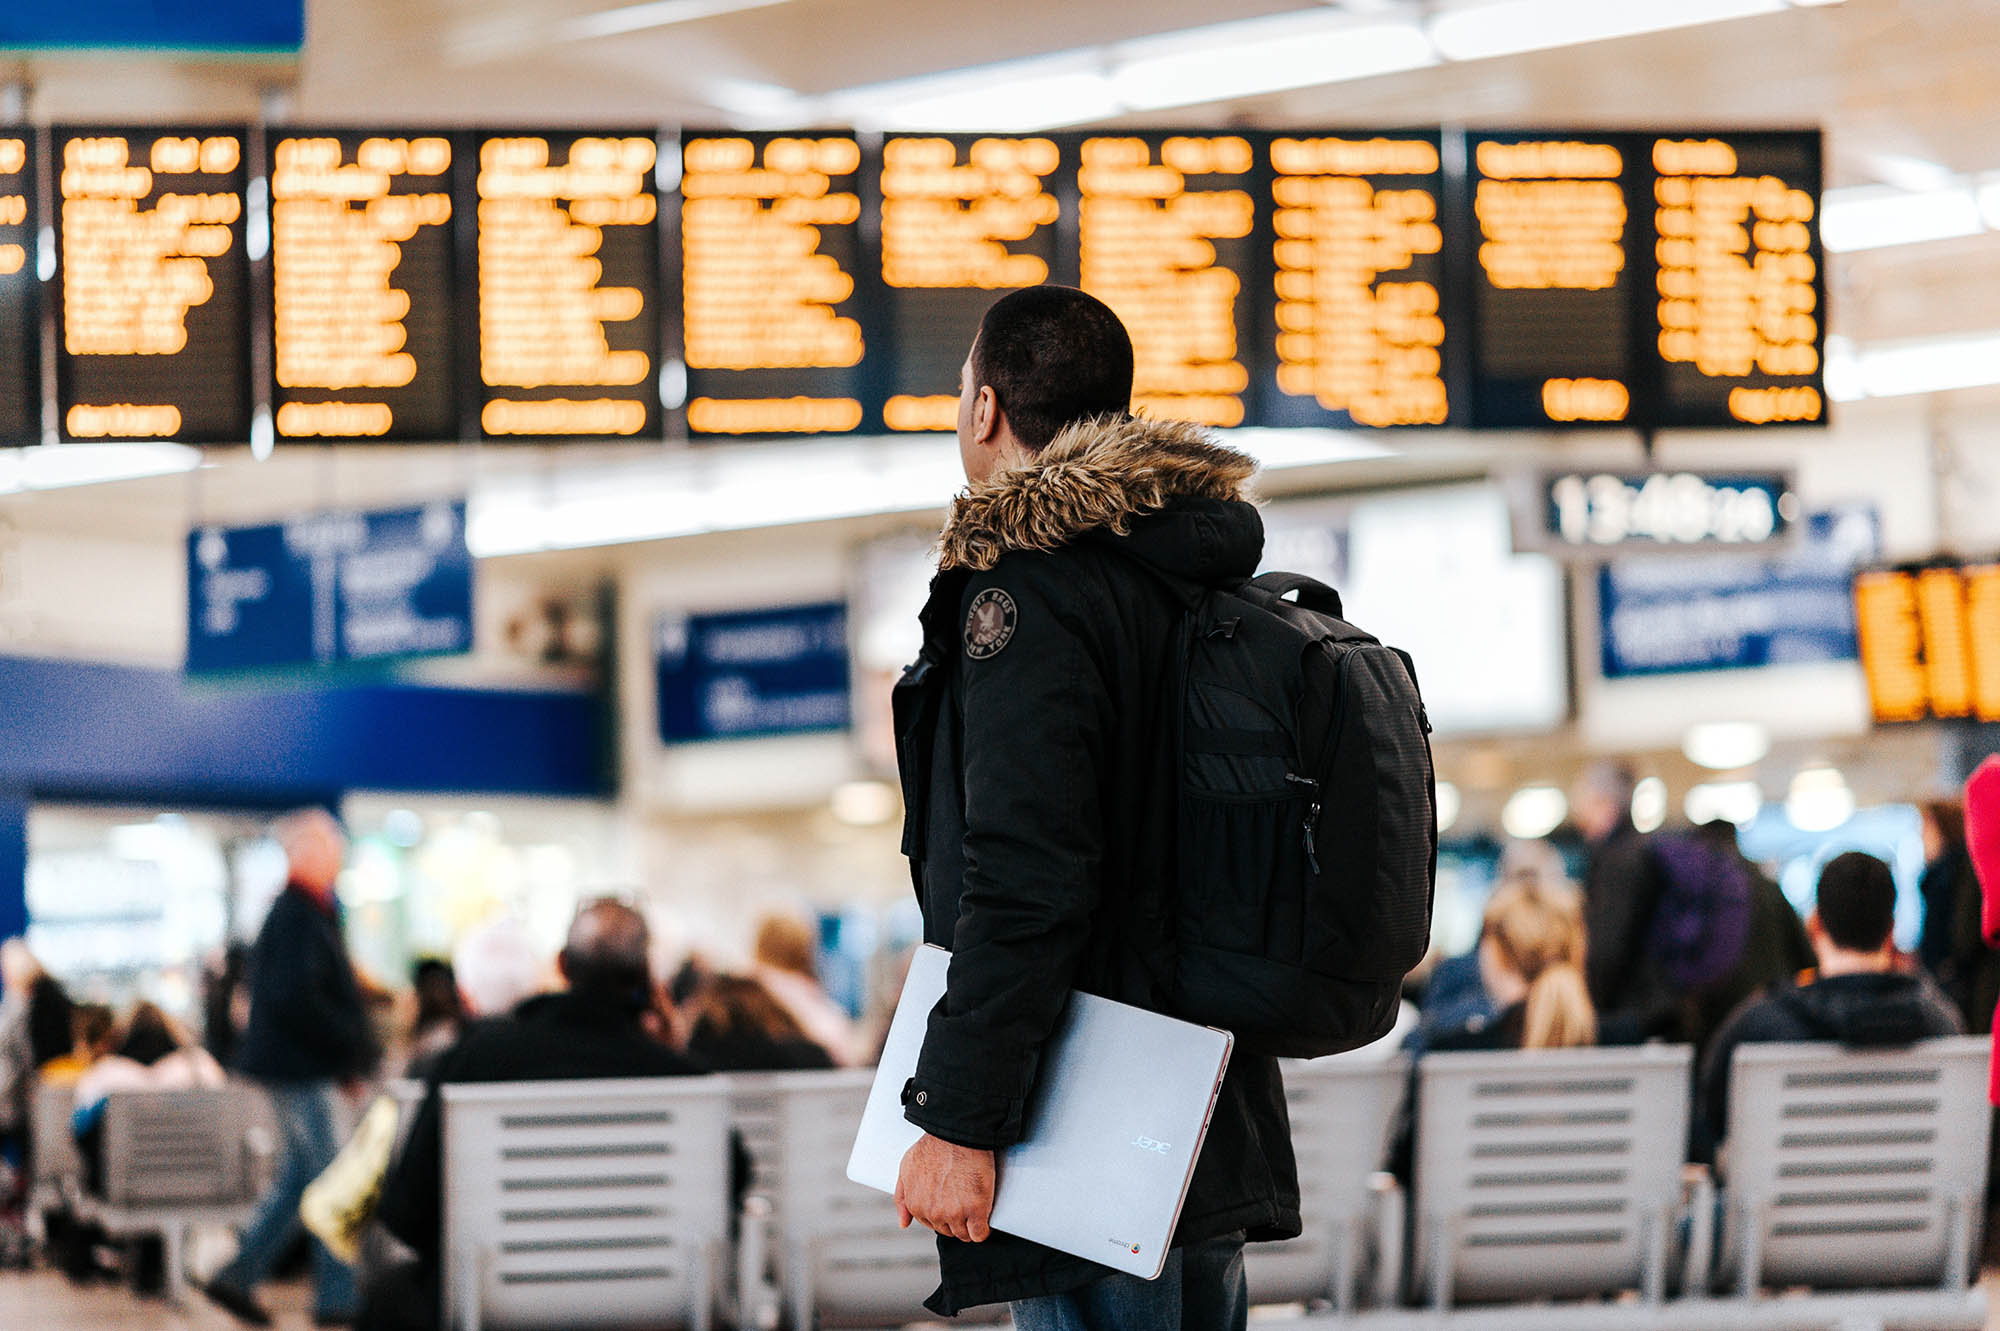 Flight screens inside airport - buying the right travel insurance article